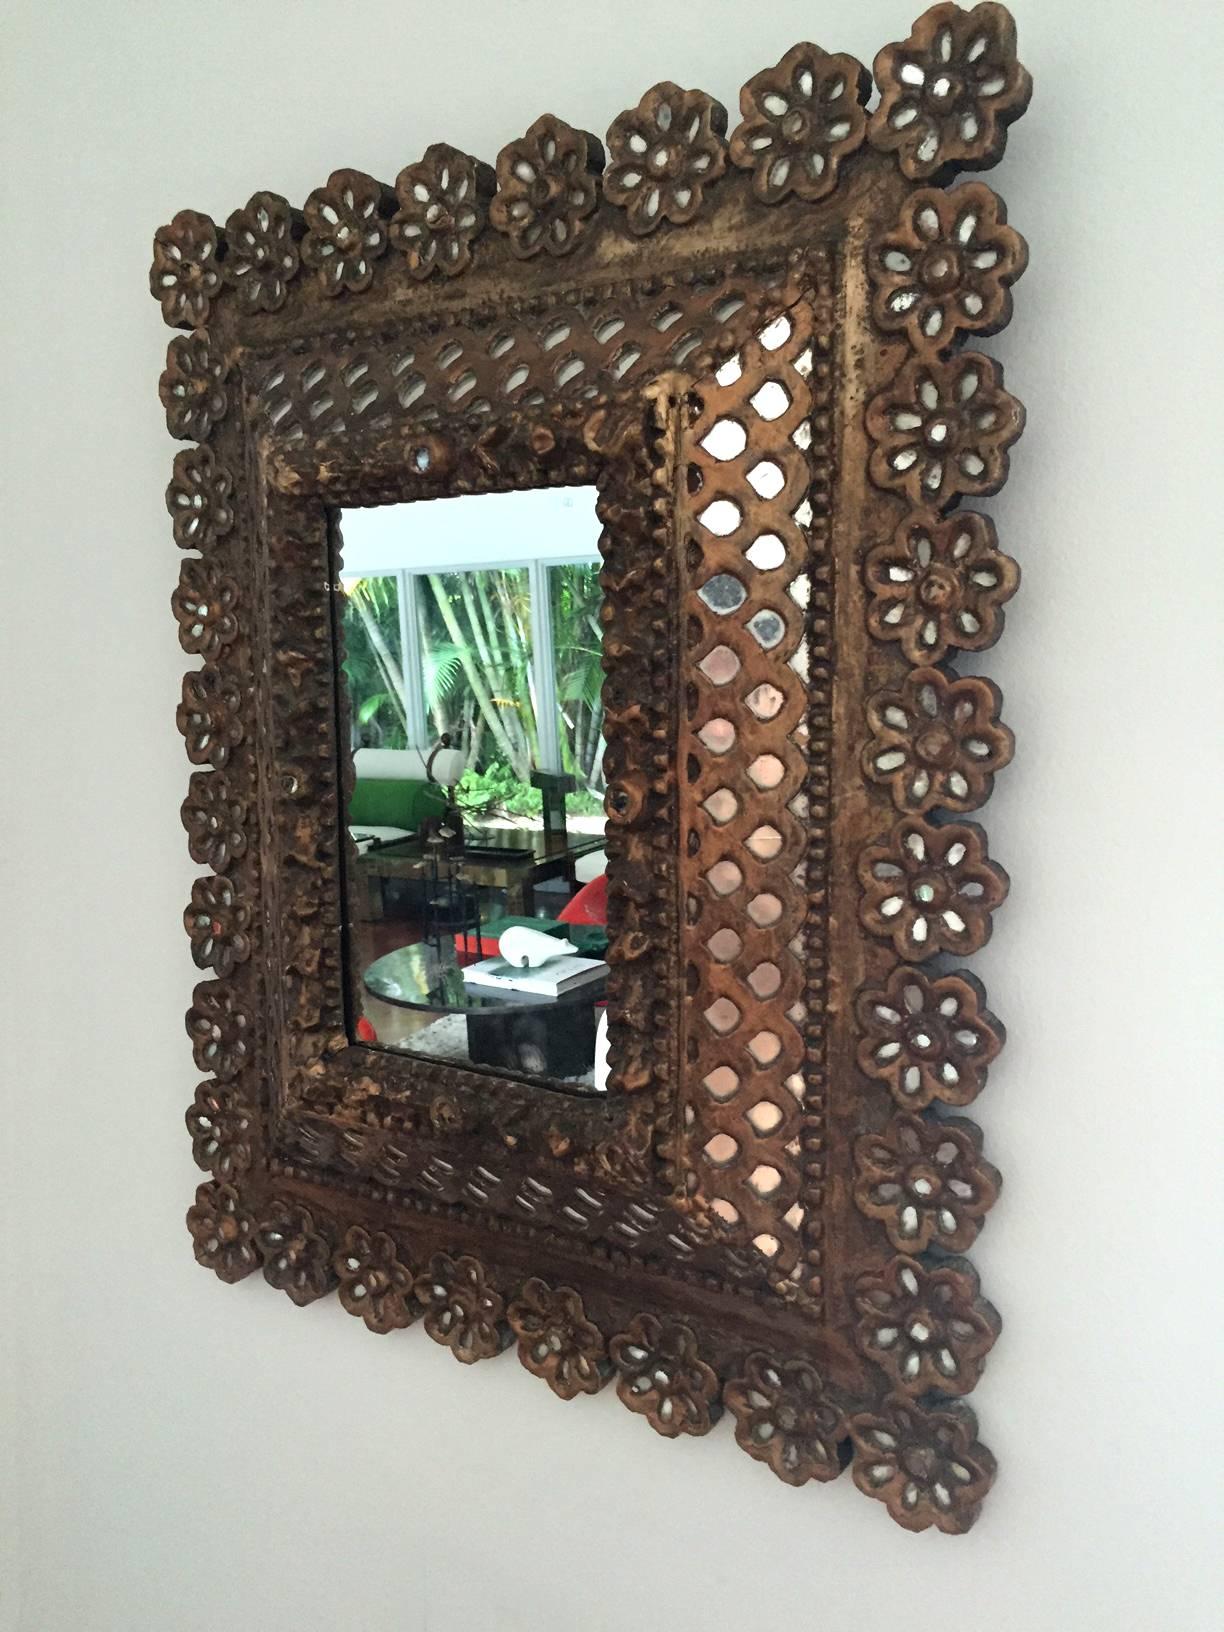 An old giltwood framed mirror from Spanish Colonial era, circa 19th century. It features a center mirror 7